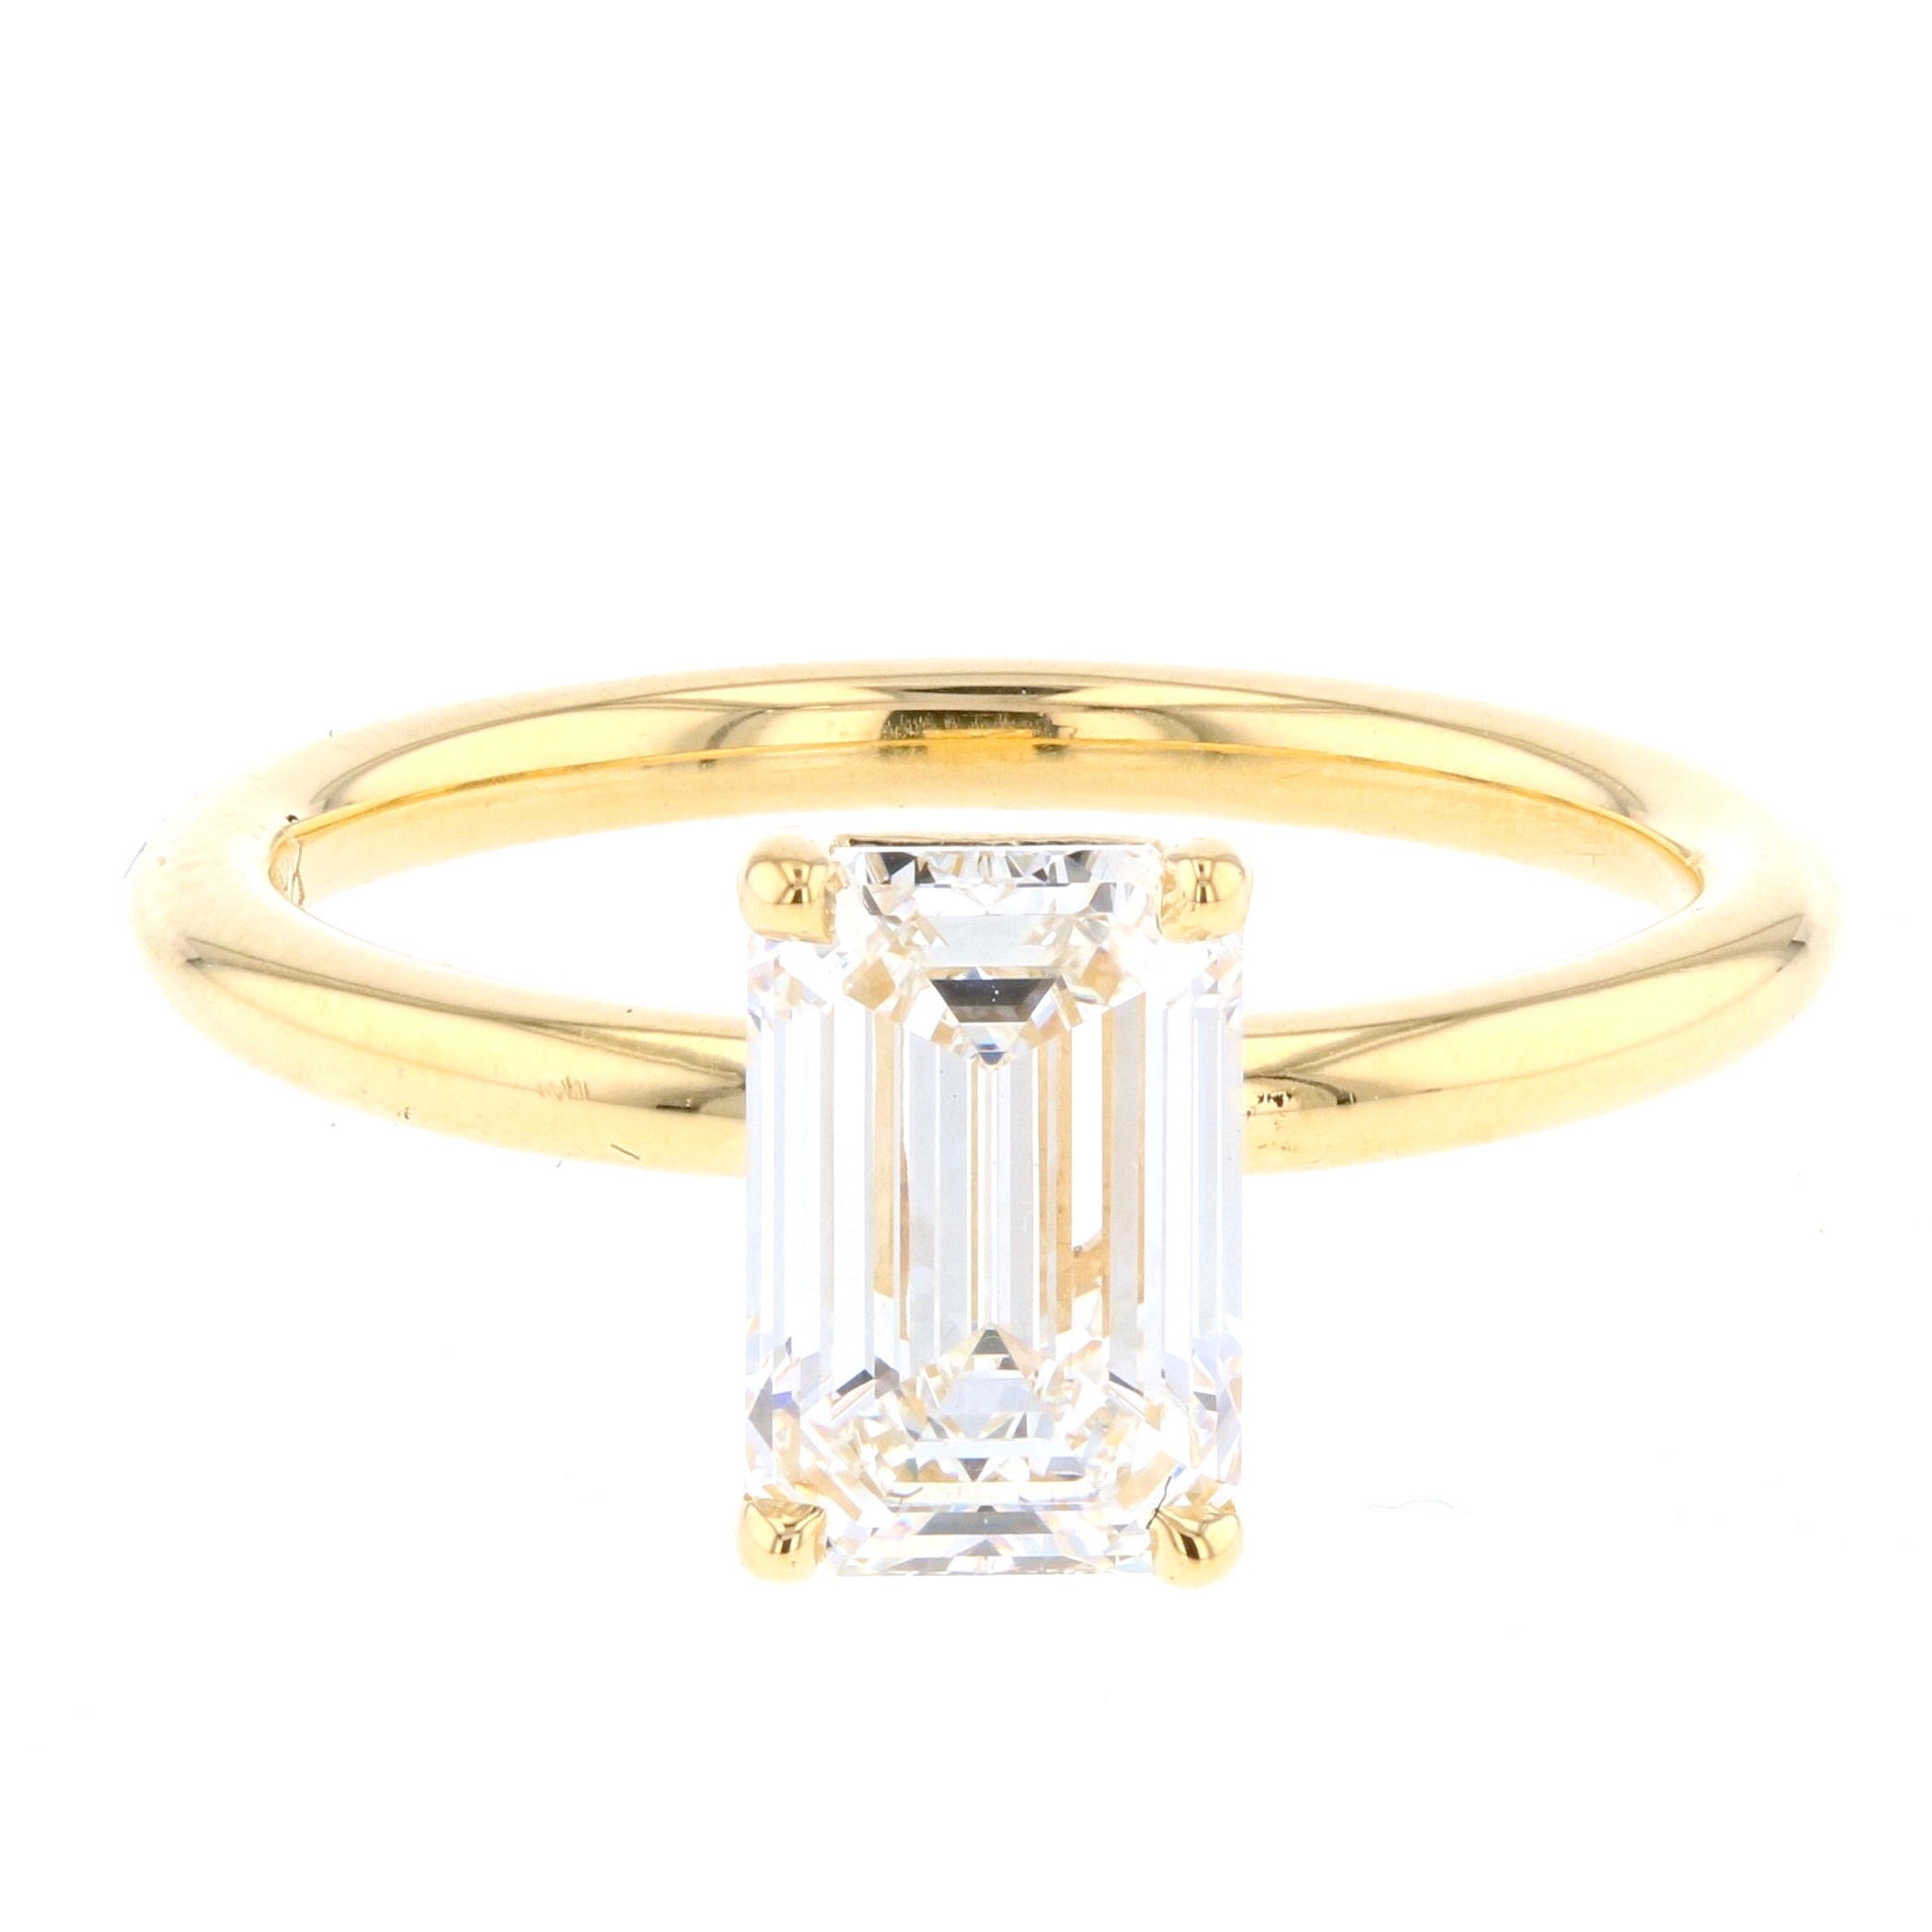 Emerald Cut Diamond Engagement Ring in Yellow Gold Solitaire